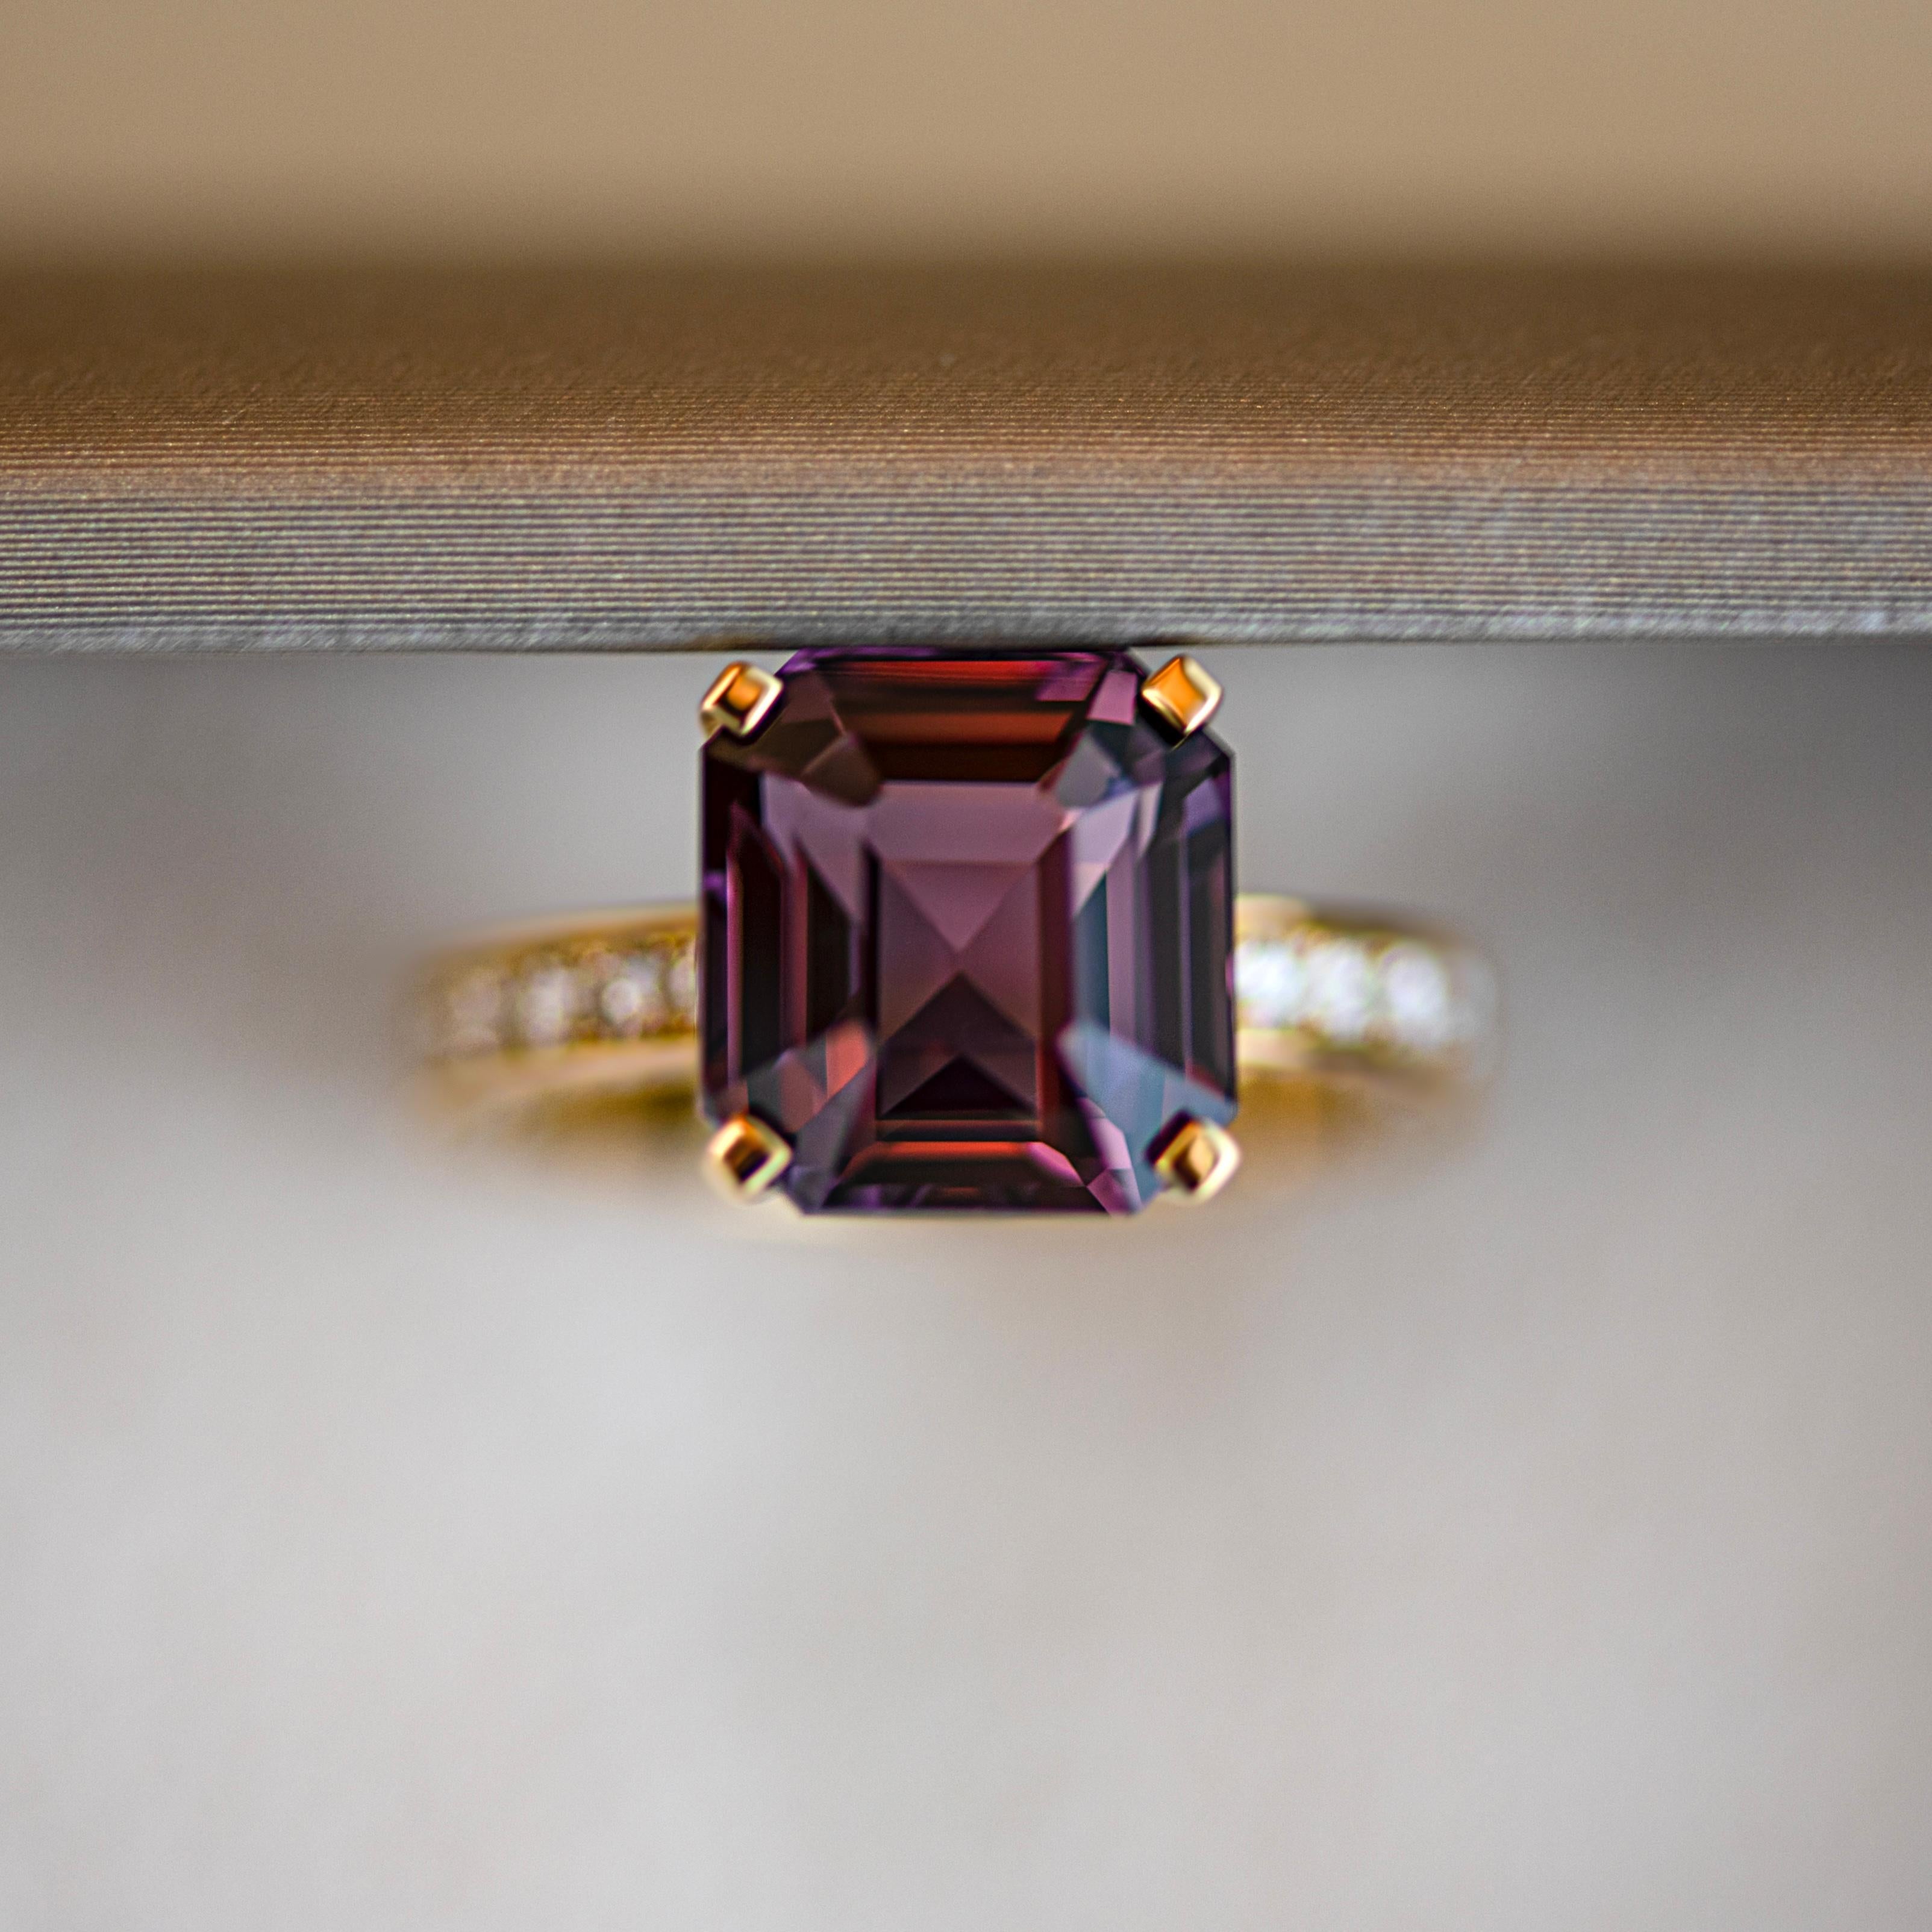 Ring for spinel lovers from our new 